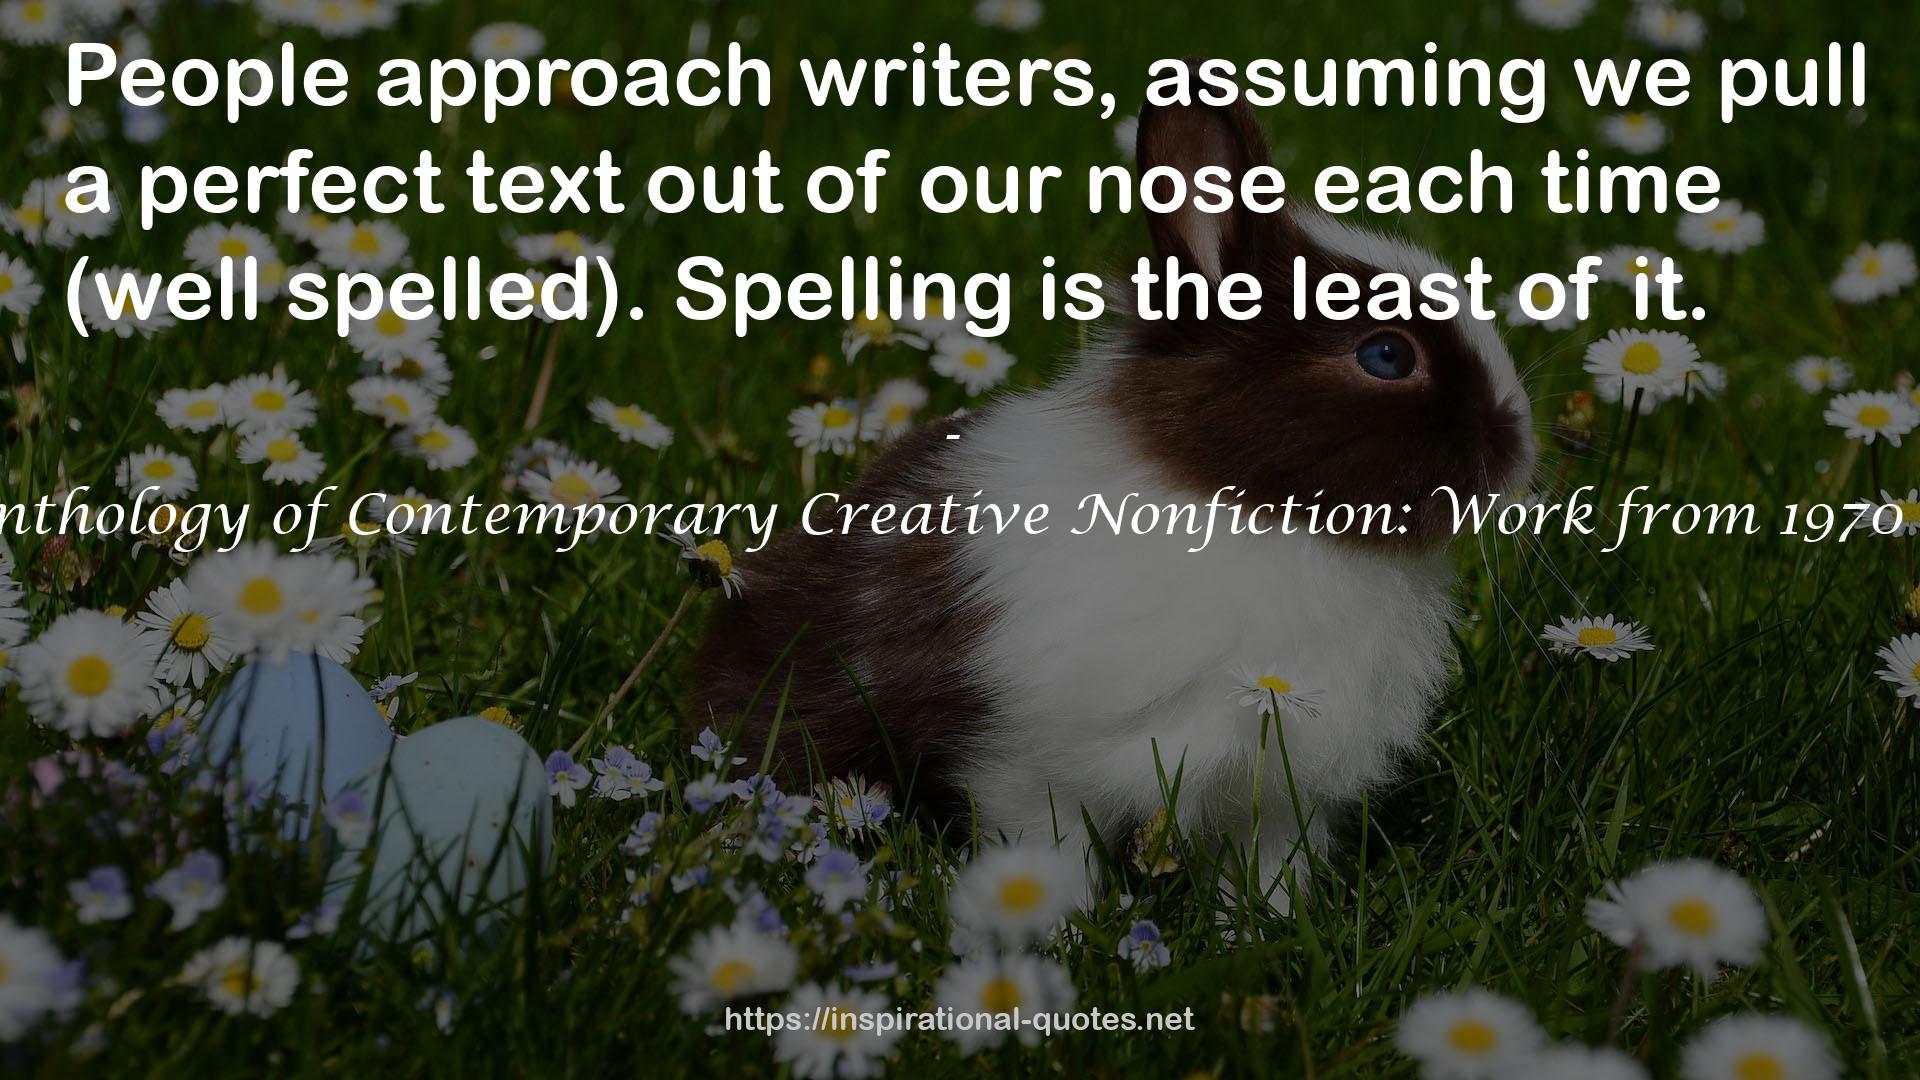 Touchstone Anthology of Contemporary Creative Nonfiction: Work from 1970 to the Present QUOTES